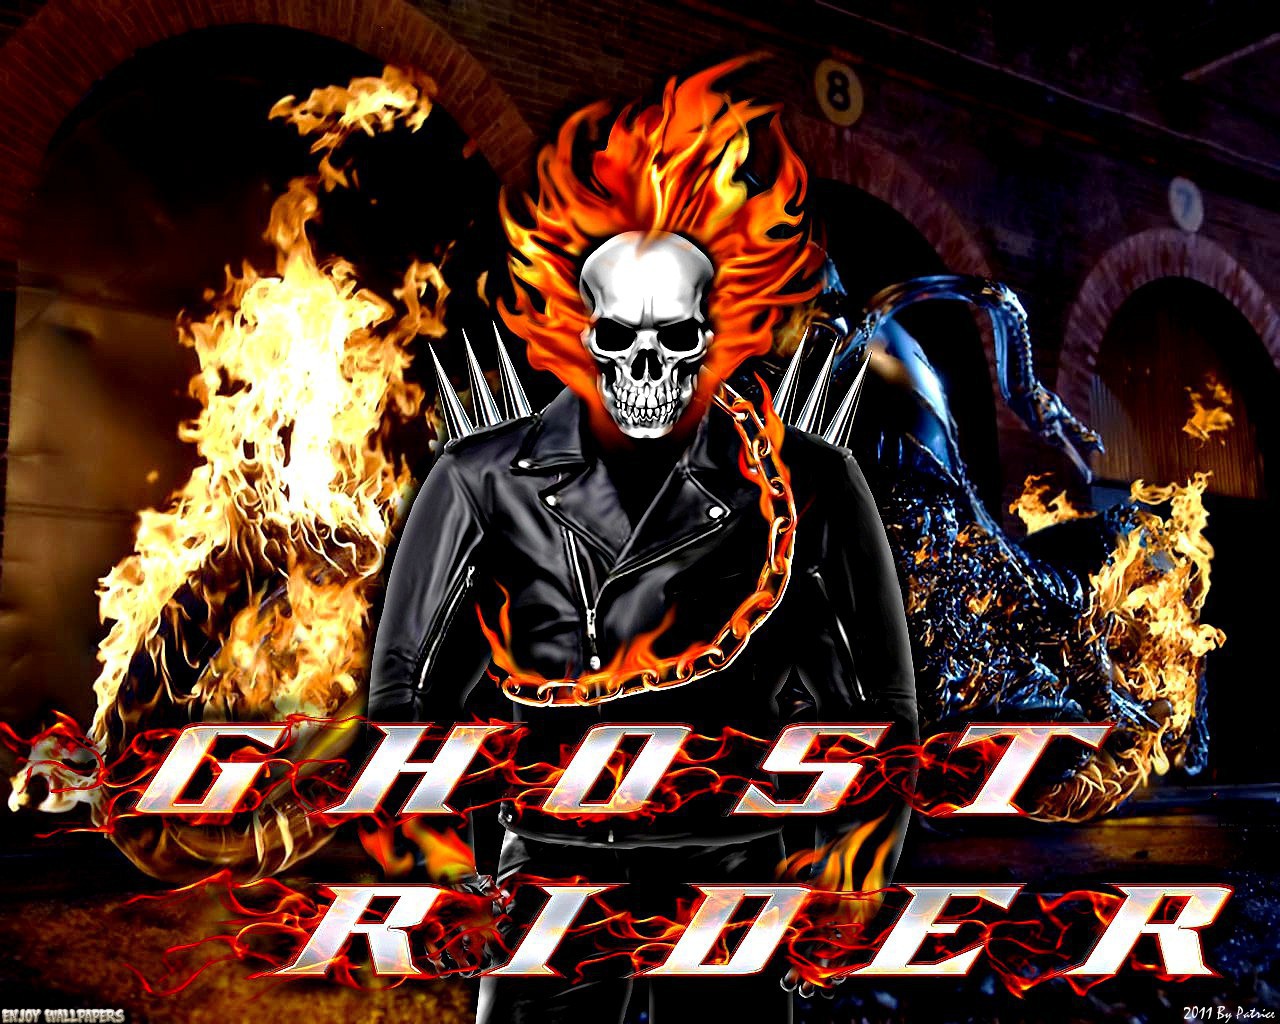  wallpaper wallpaper ghost rider 2 ghost rider hd wallpapers ghost